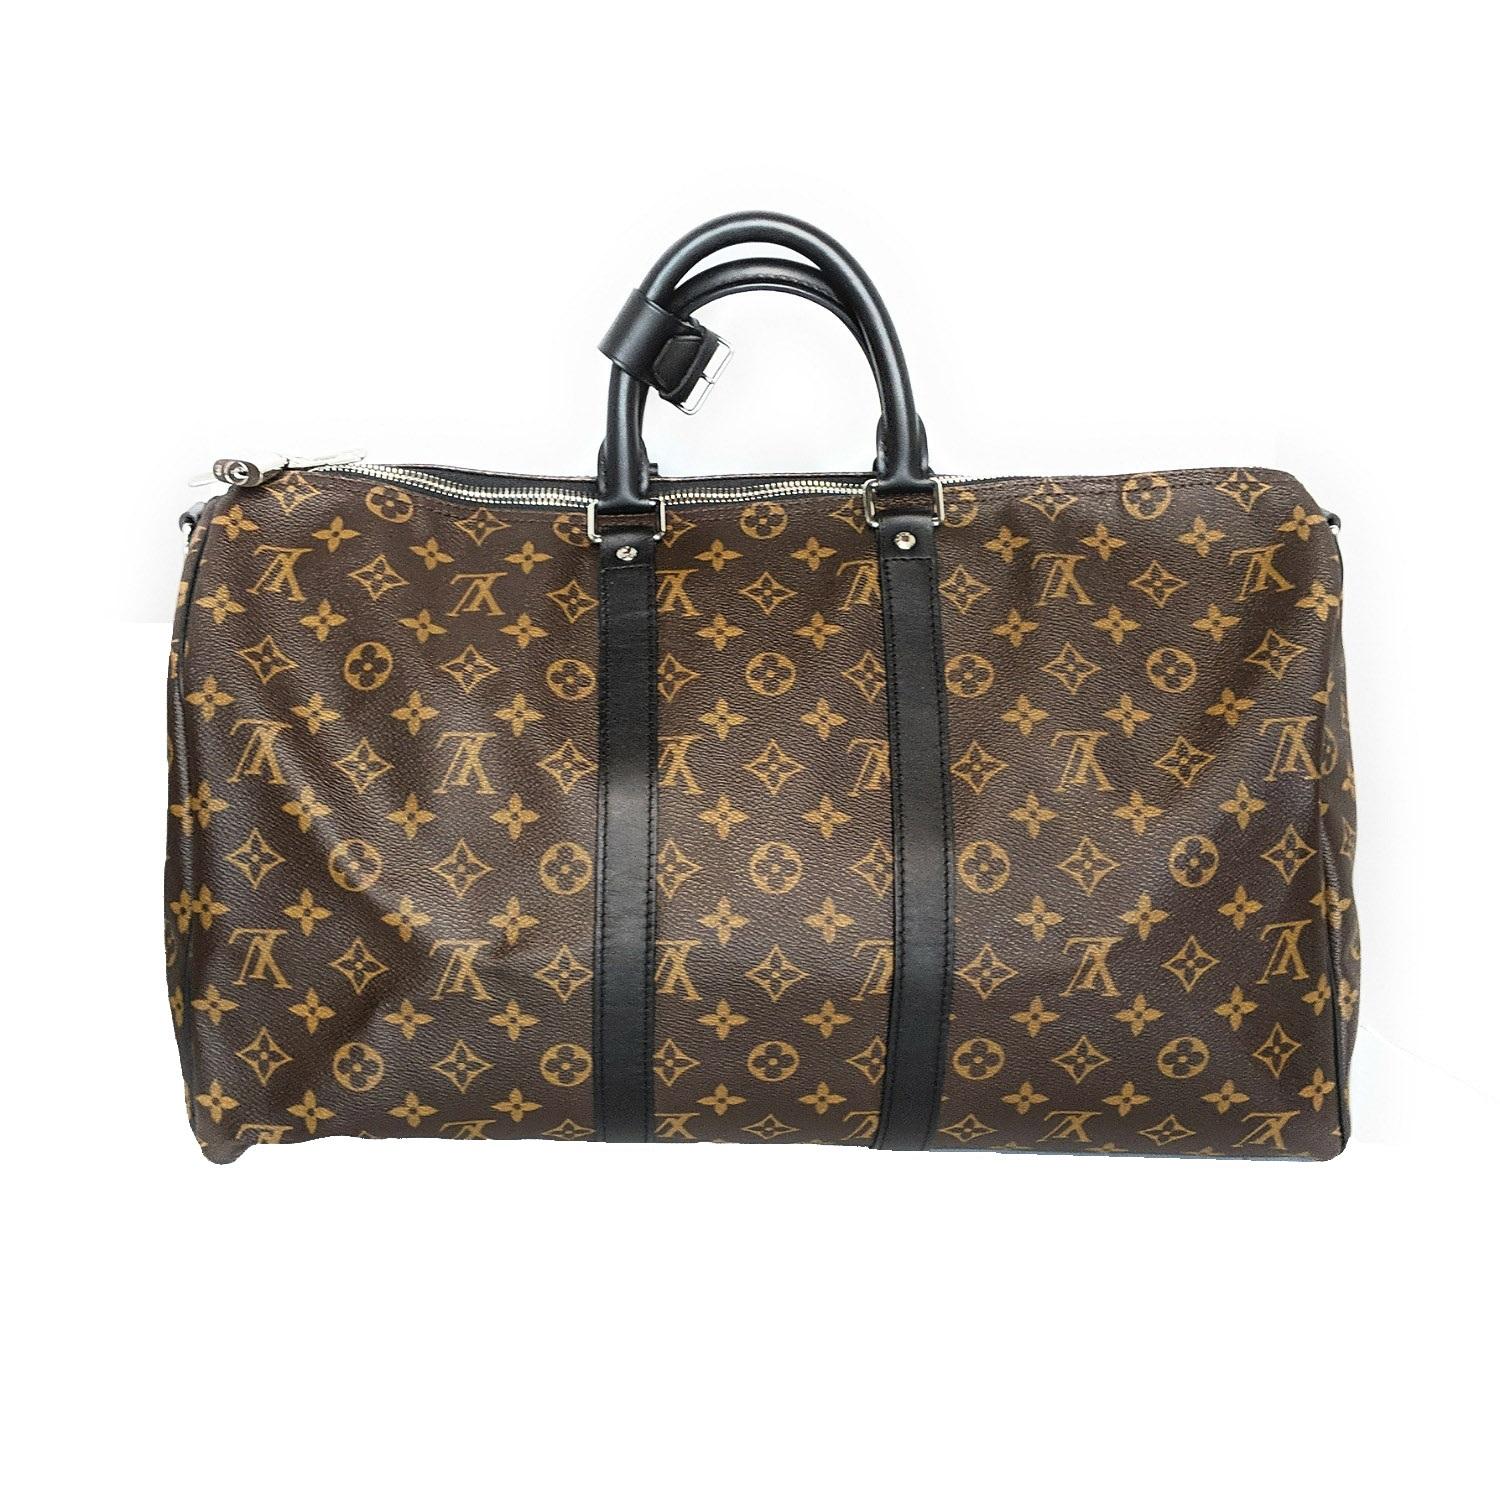 Men’s brown and tan monogram coated canvas Louis Vuitton Keepall Bandoulière 45 with silver-tone hardware, dual rolled top handles, detachable flat shoulder strap featuring buckle adjustment, black Macassar leather trim, plum canvas interior and